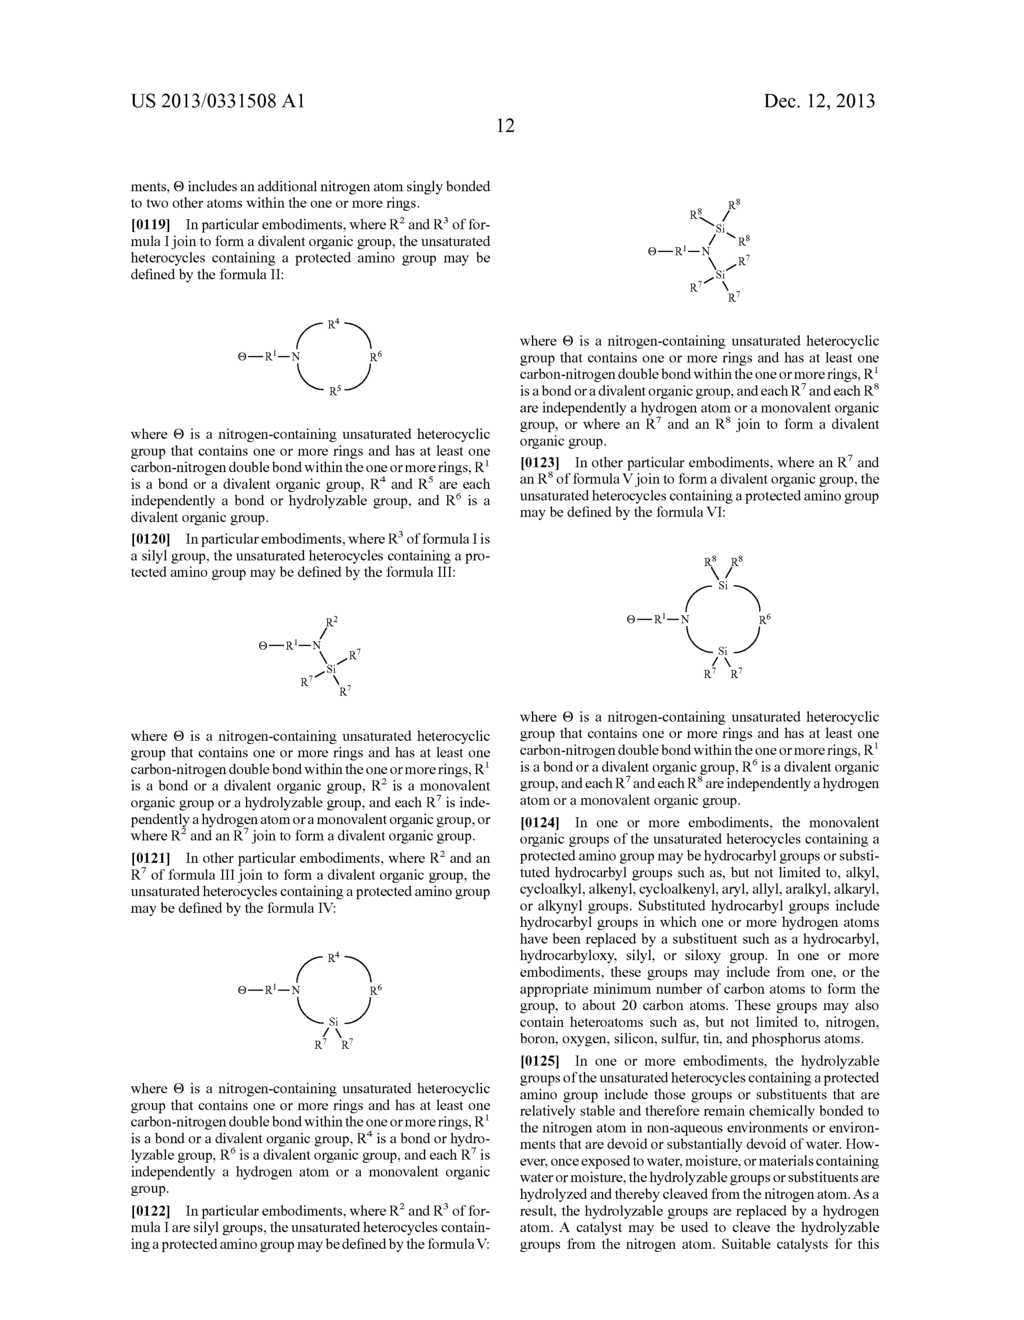 POLYMERS FUNCTIONALIZED WITH UNSATURATED HETEROCYCLES CONTAINING A     PROTECTED AMINO GROUP - diagram, schematic, and image 17